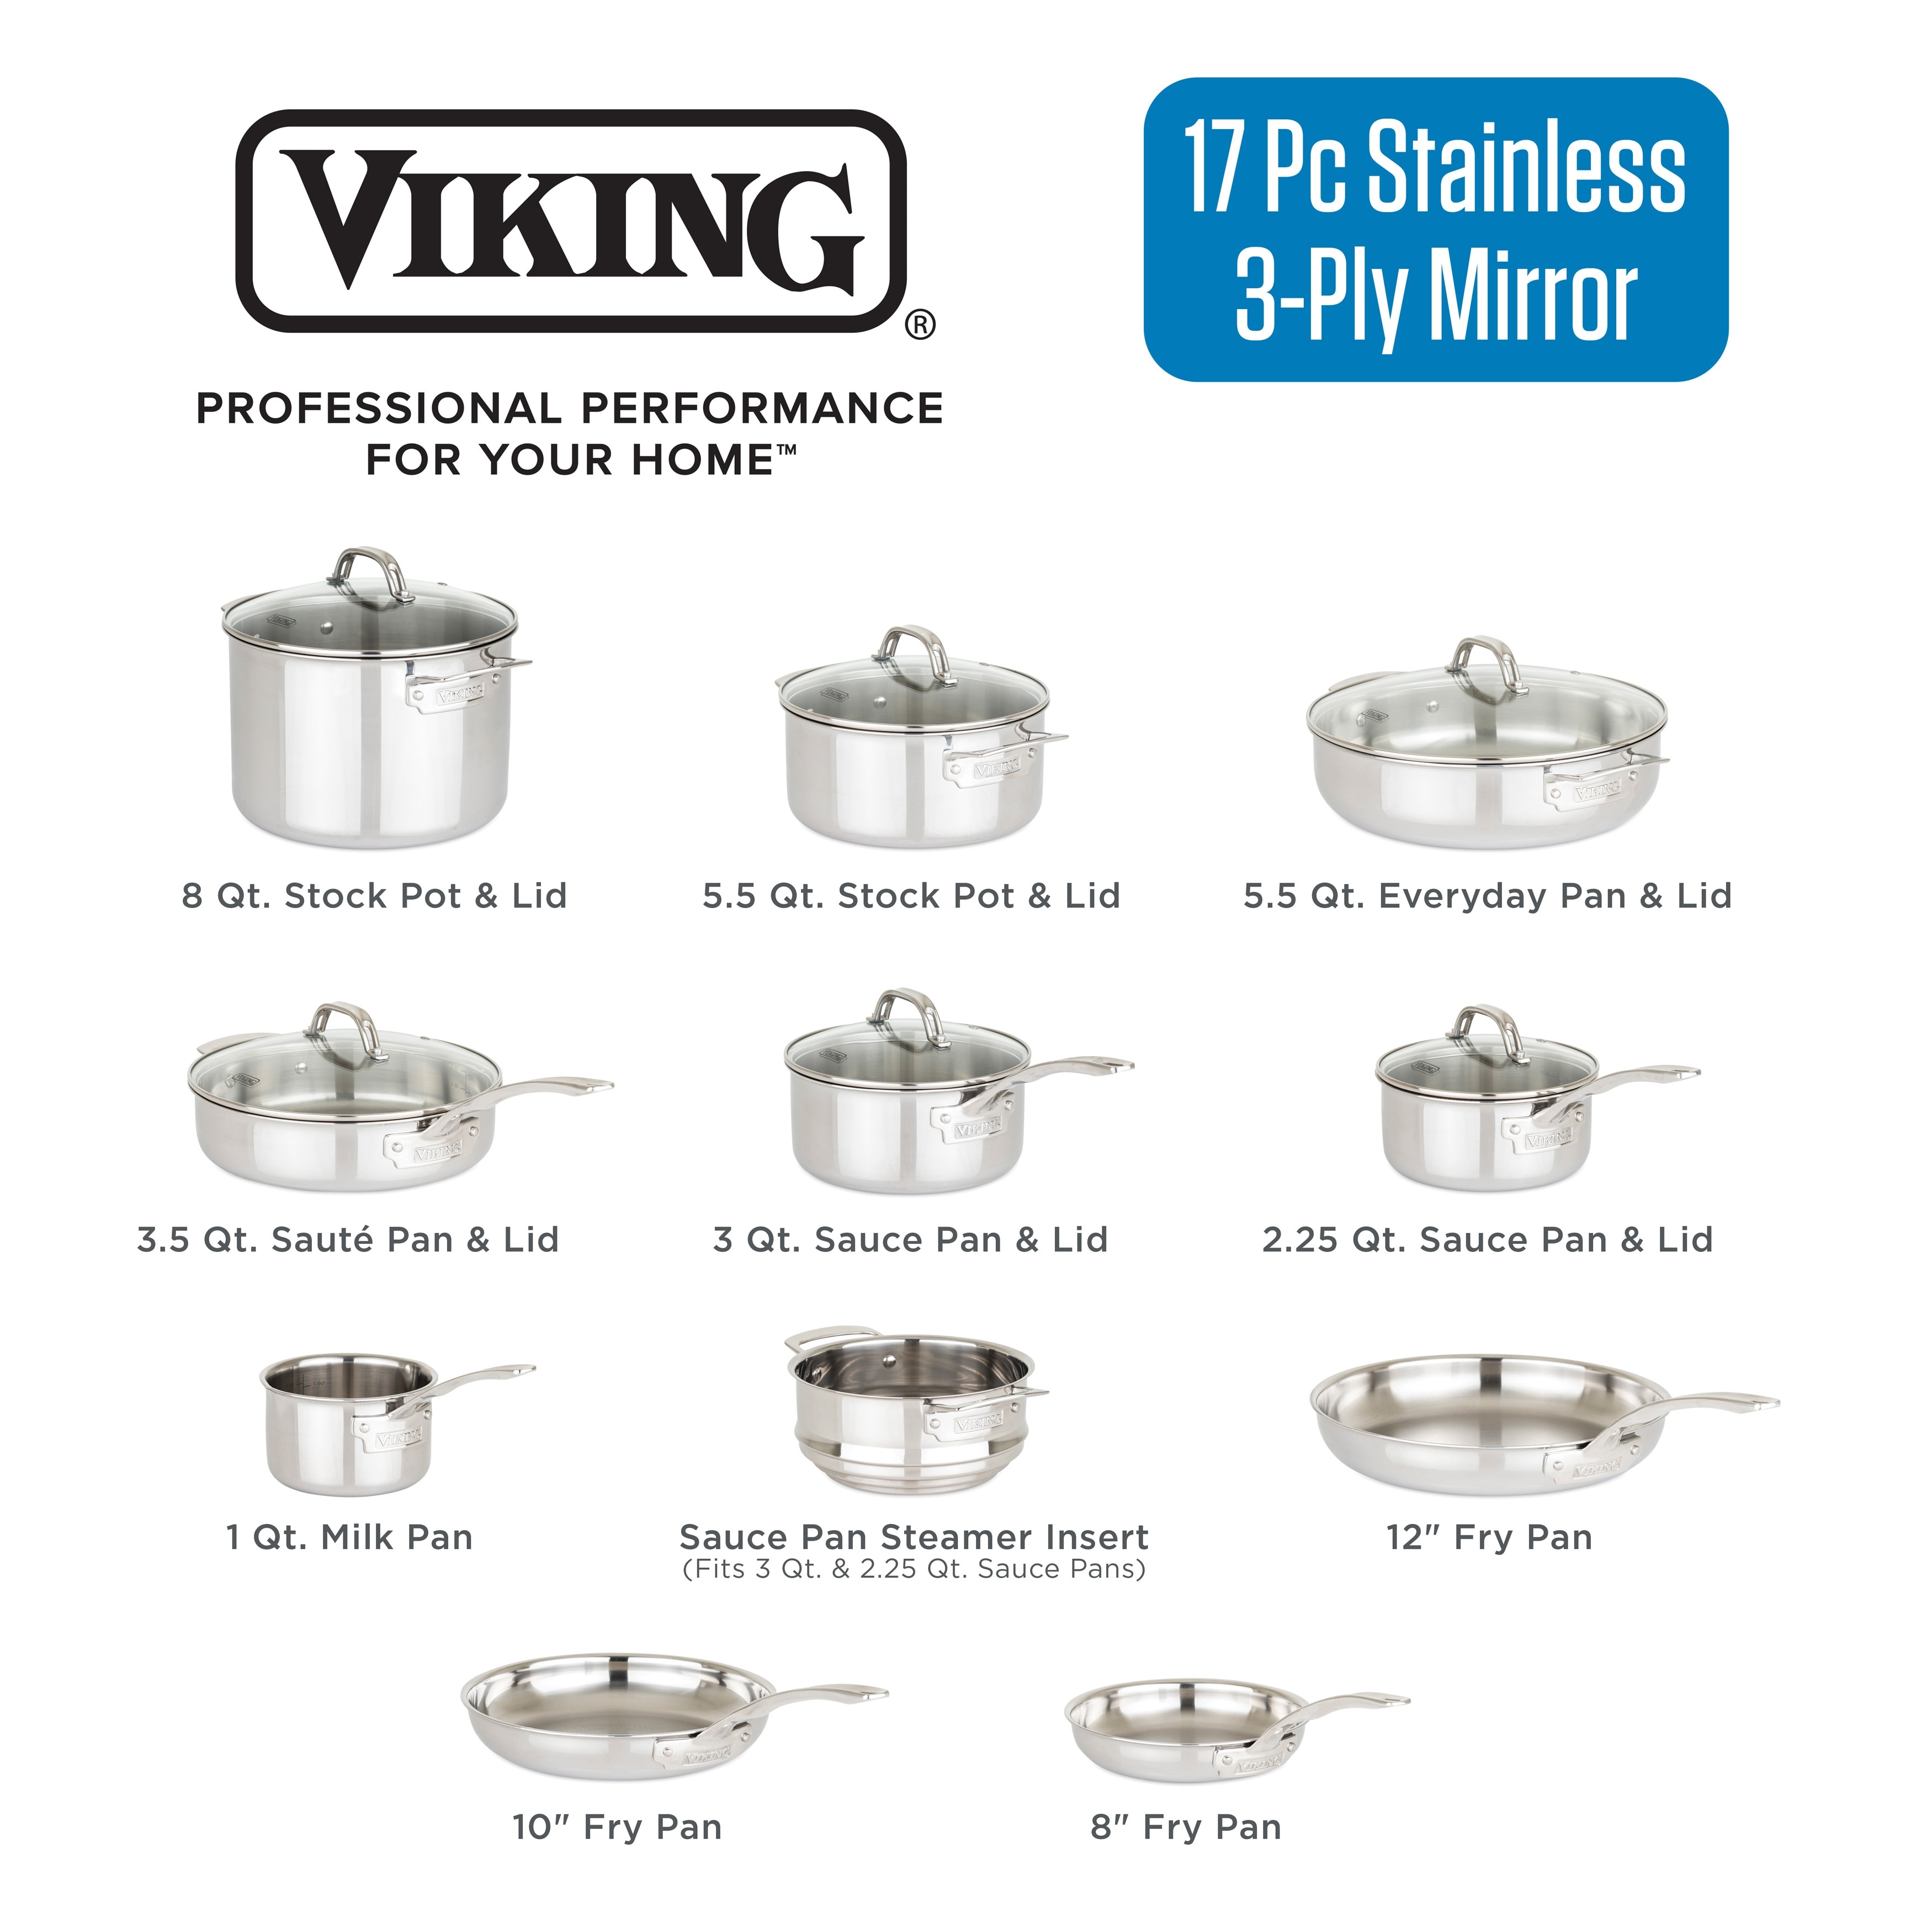 https://ak1.ostkcdn.com/images/products/is/images/direct/e9574cce575976732114e26d009a3fc75265e672/Viking-3-Ply-Stainless-Steel-17-piece-Cookware-Set-with-Glass-Lids.jpg